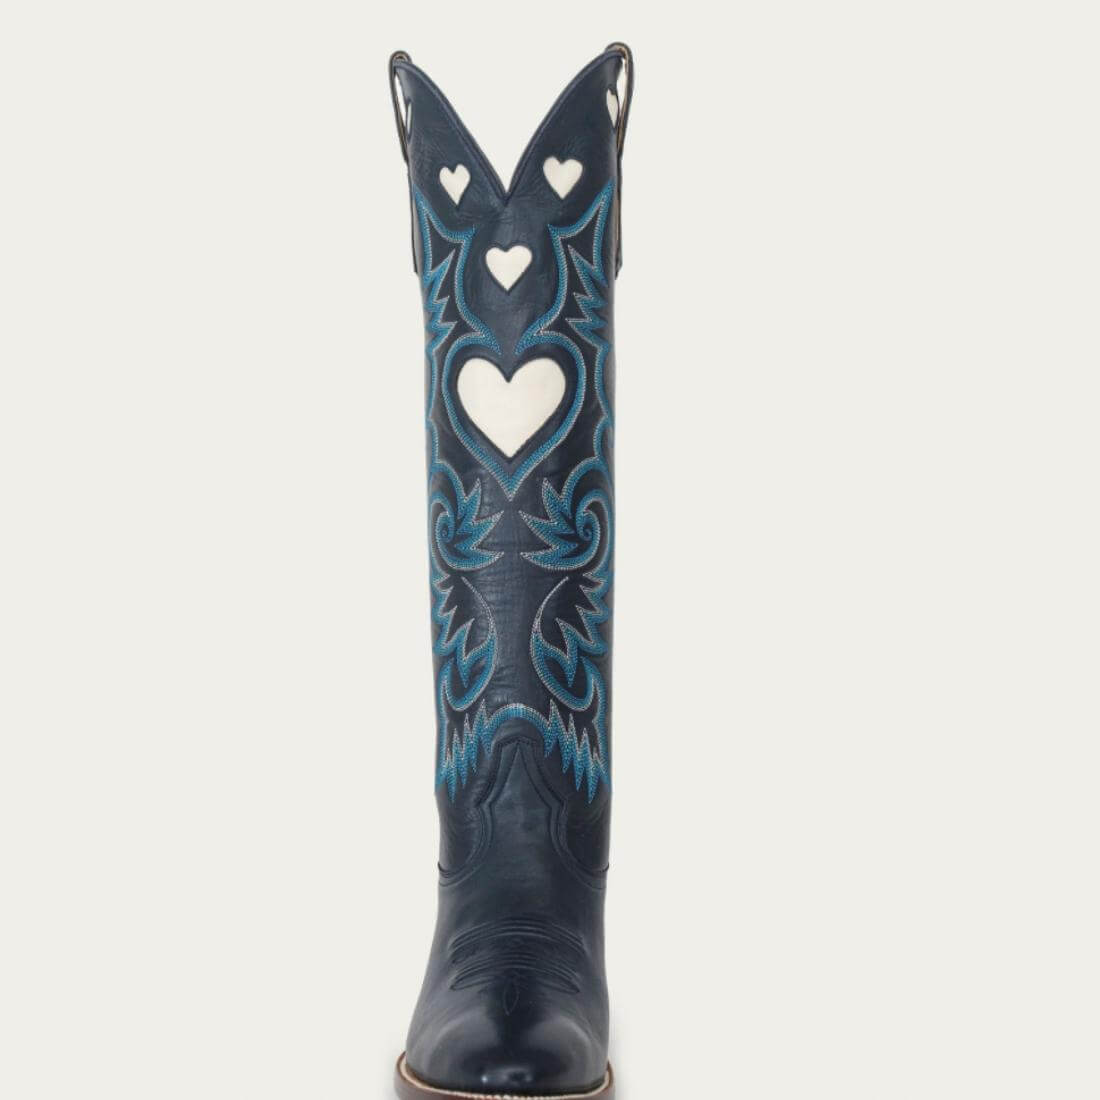 Navy Heart Boot front profile